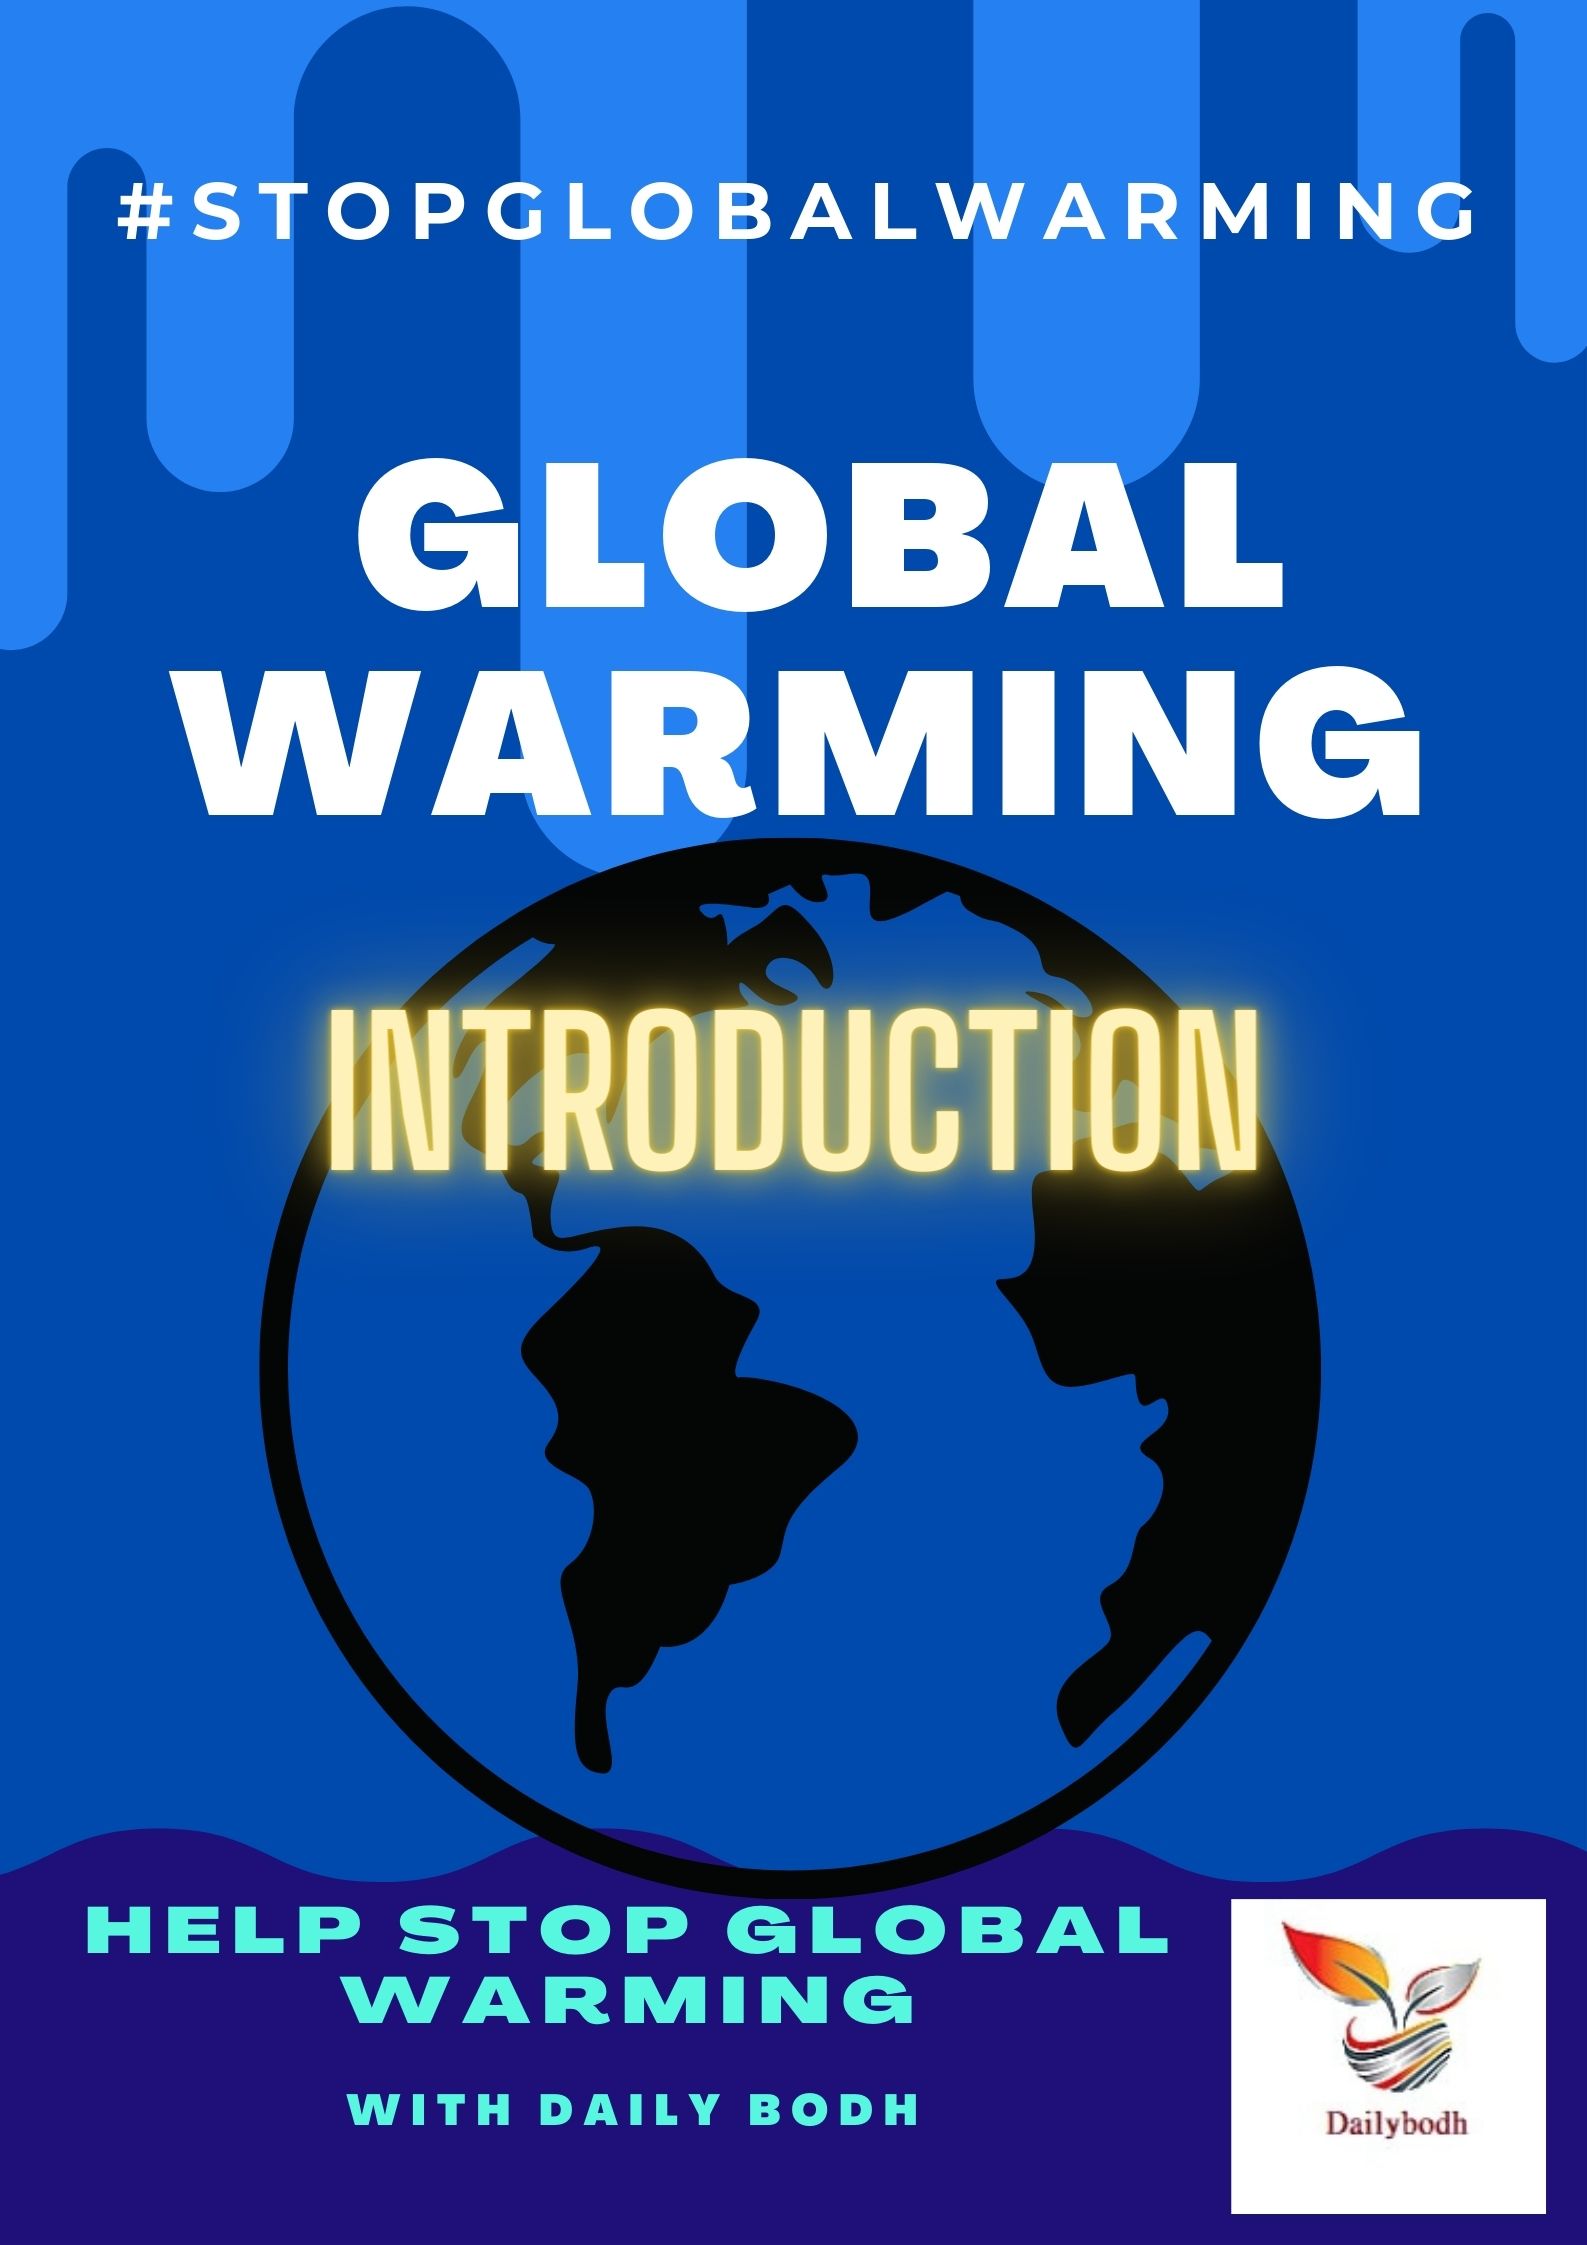 Introduction (What is Global warming)